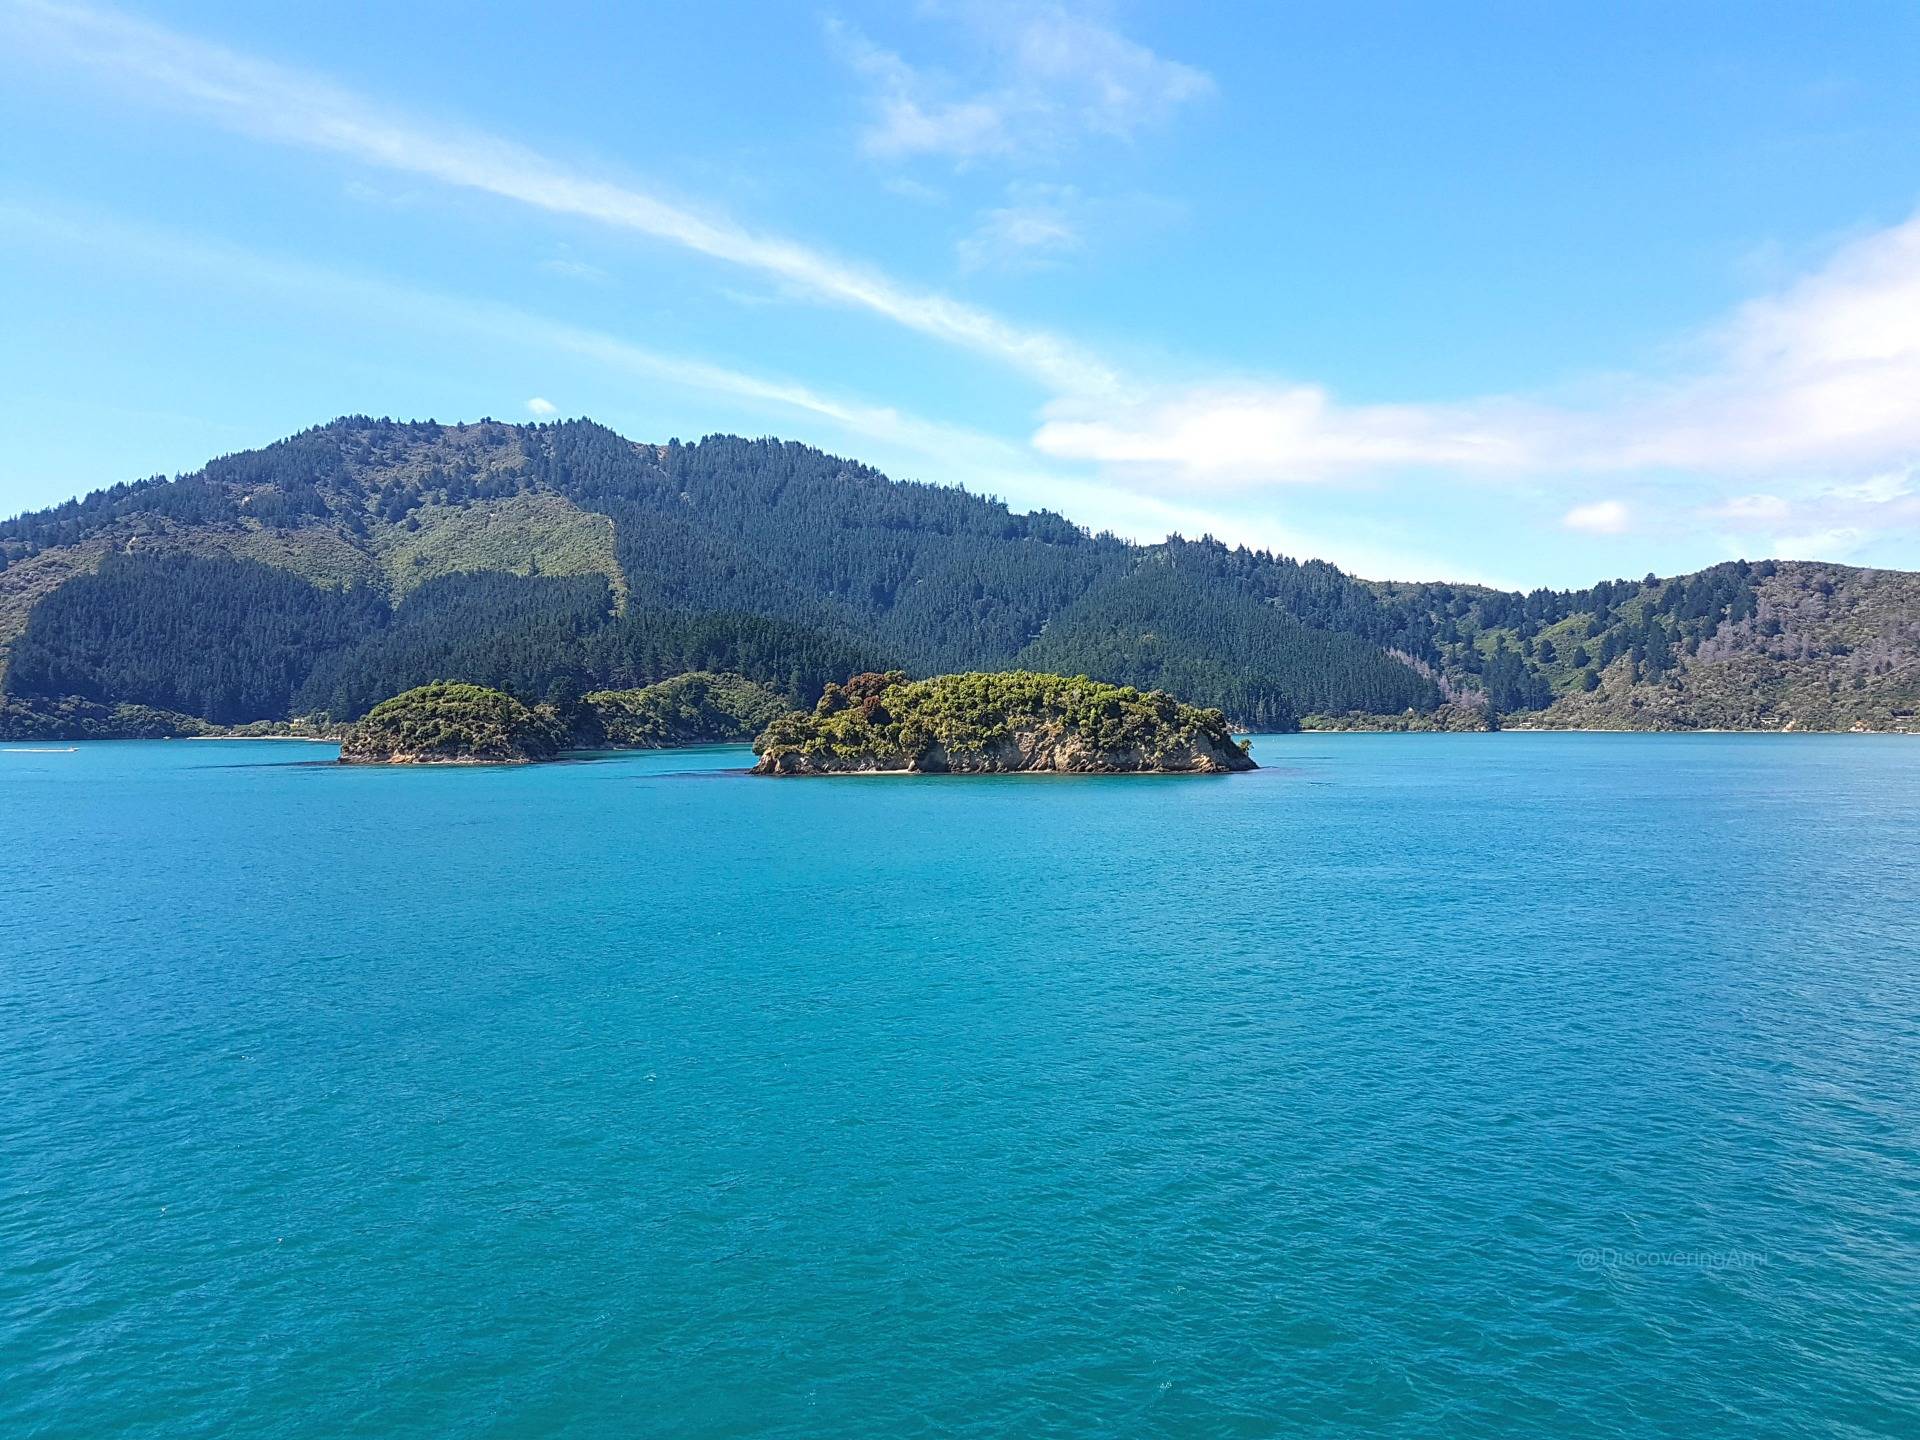 Cook Strait and its islets